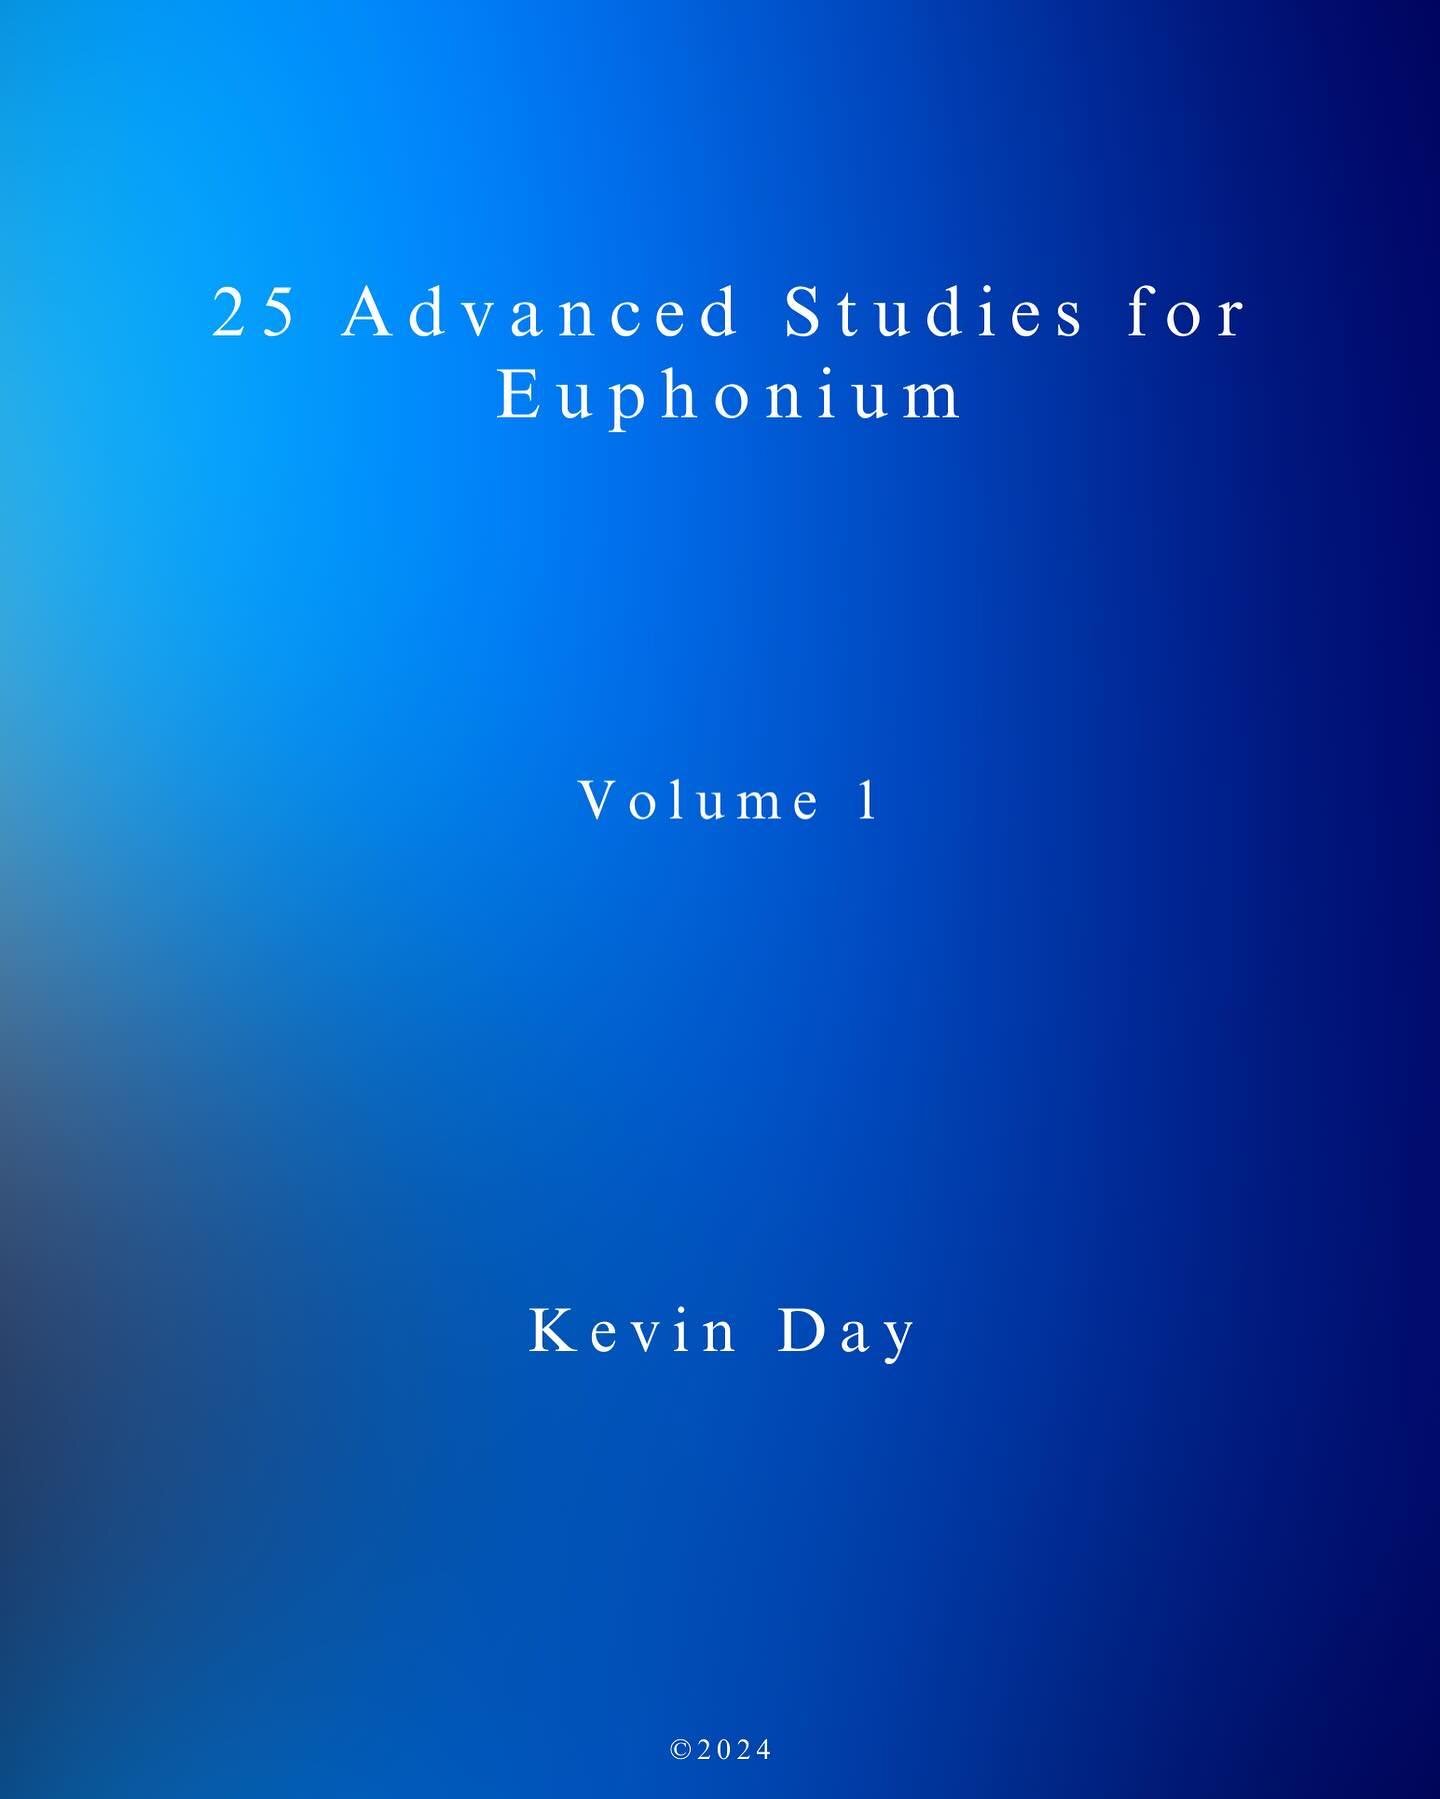 I&rsquo;m excited to share something that has been in the works for quite some time now. I have completed and released my first etude book entitled &ldquo;25 Advanced Studies&rdquo; with Murphy Music Press, LLC. 

This etude book features technical a